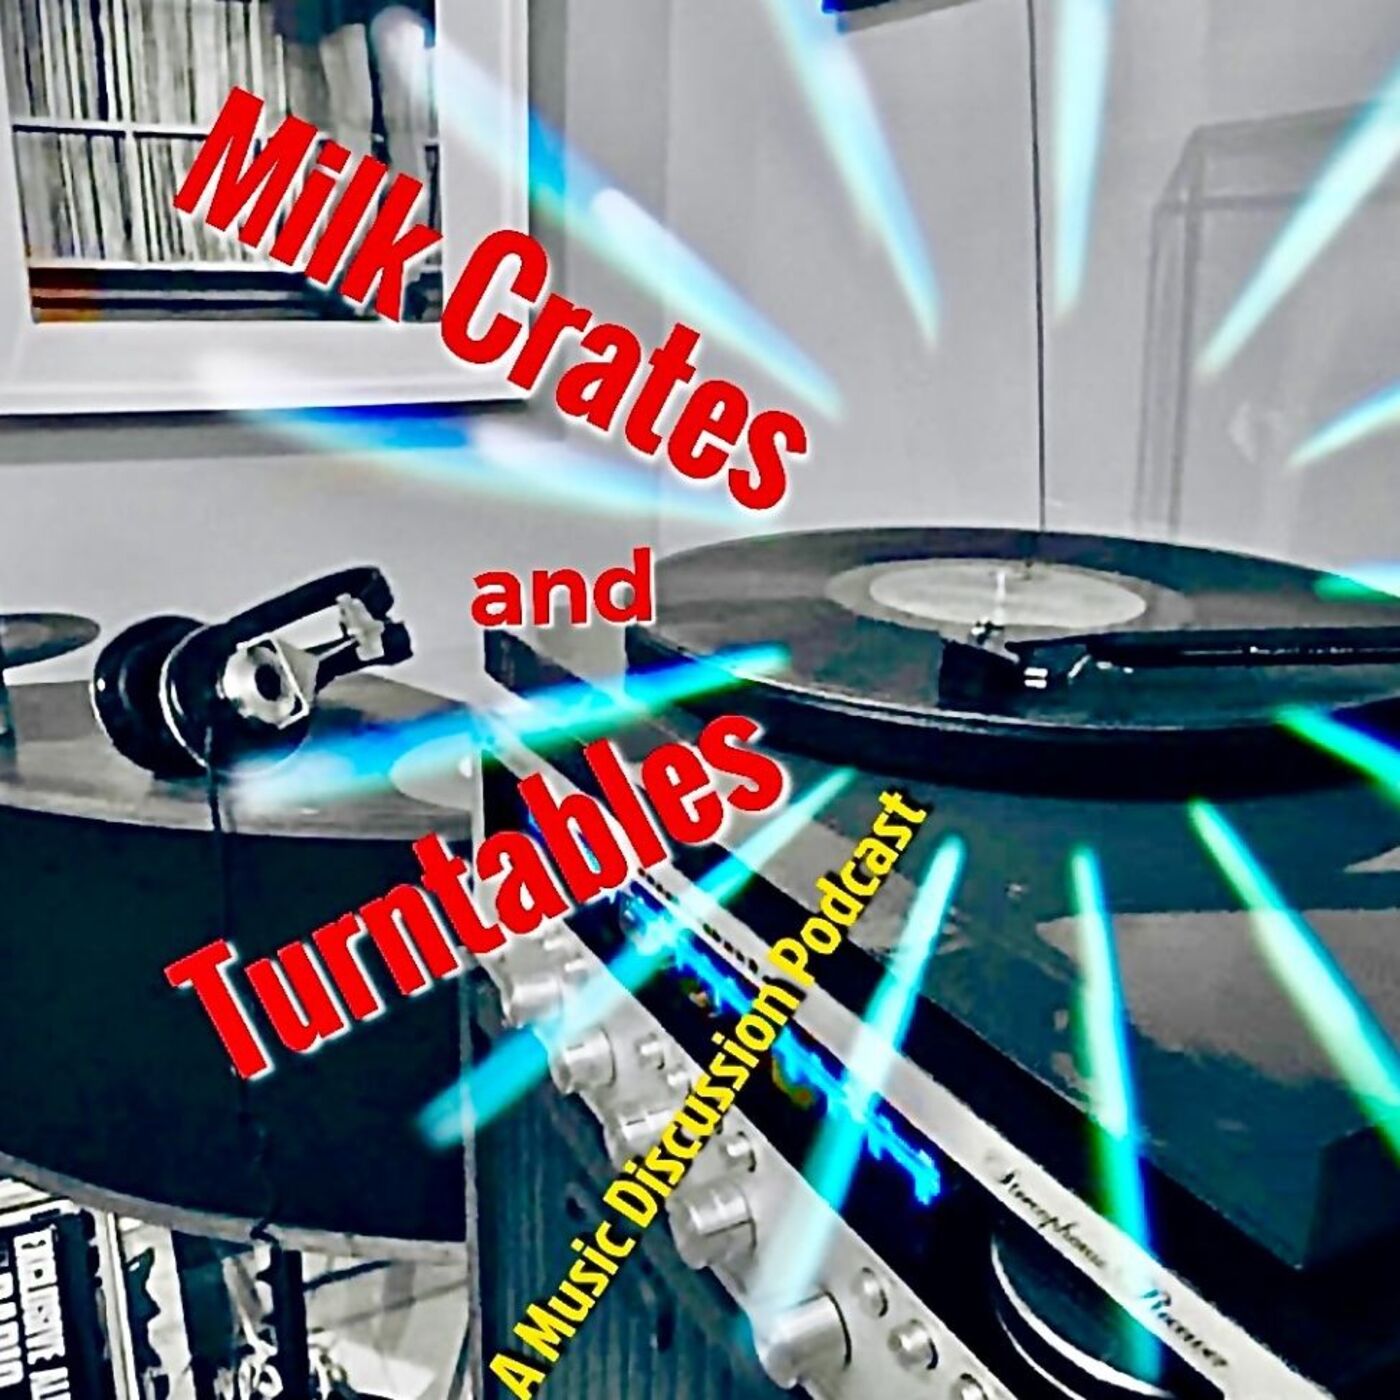 Fresh update on "amanda" discussed on Milk Crates and Turntables. A Music Discussion Podcast